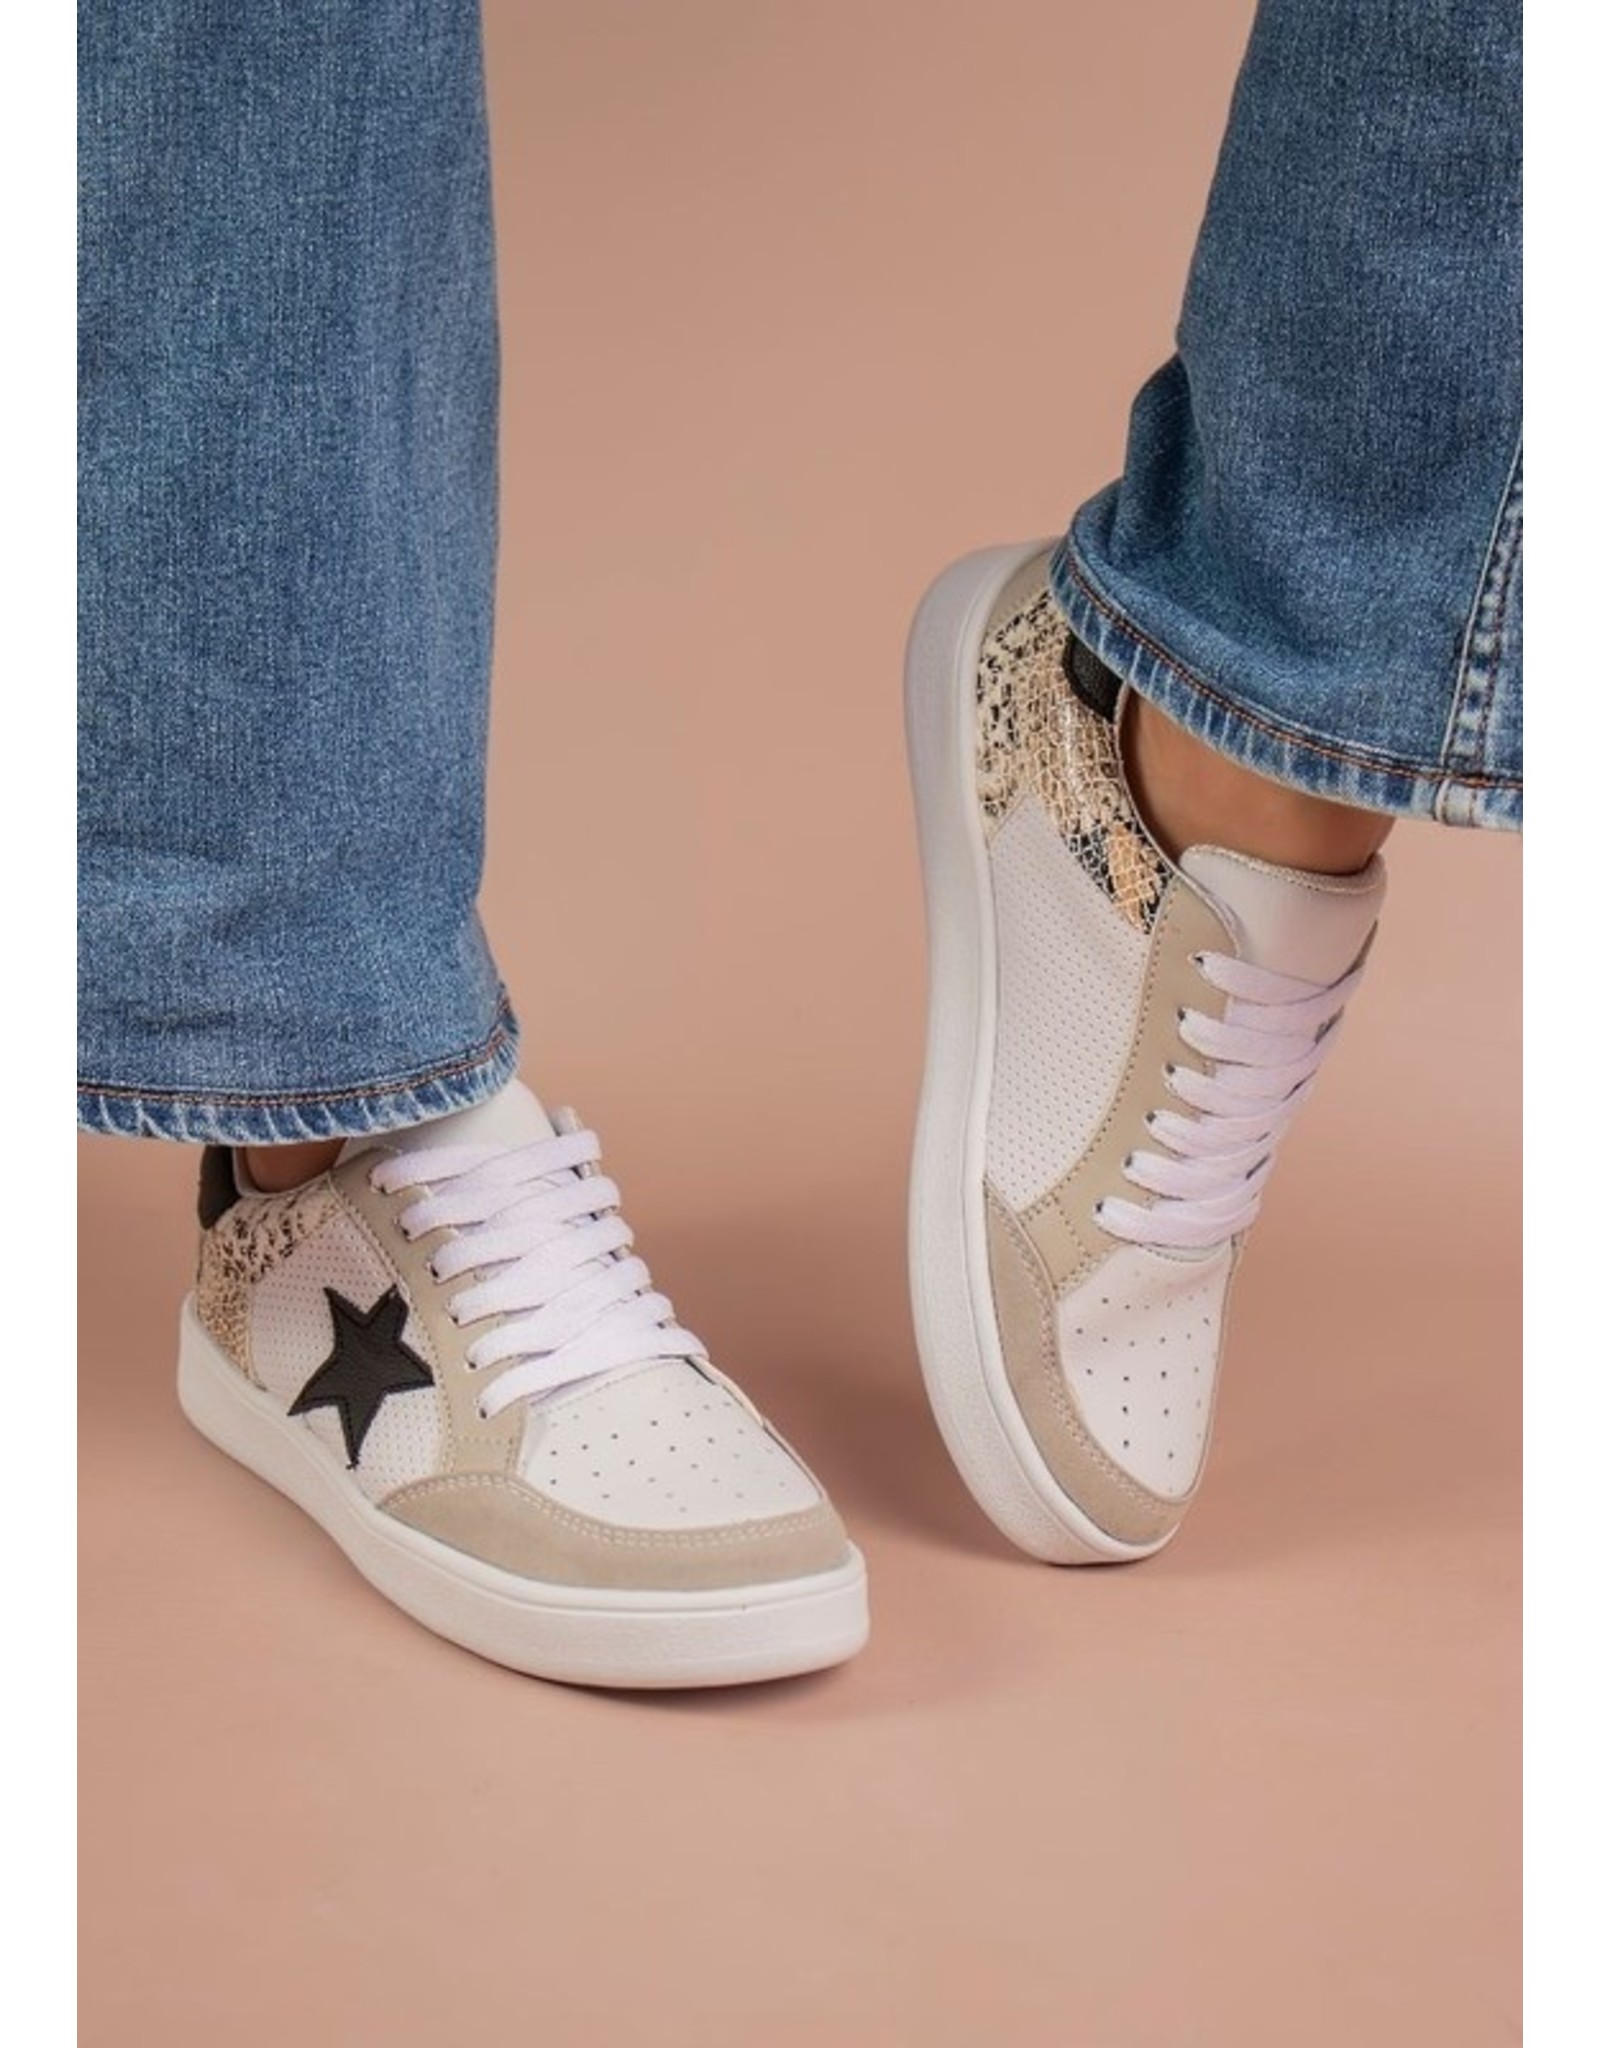 Snake Accent Star Sneakers